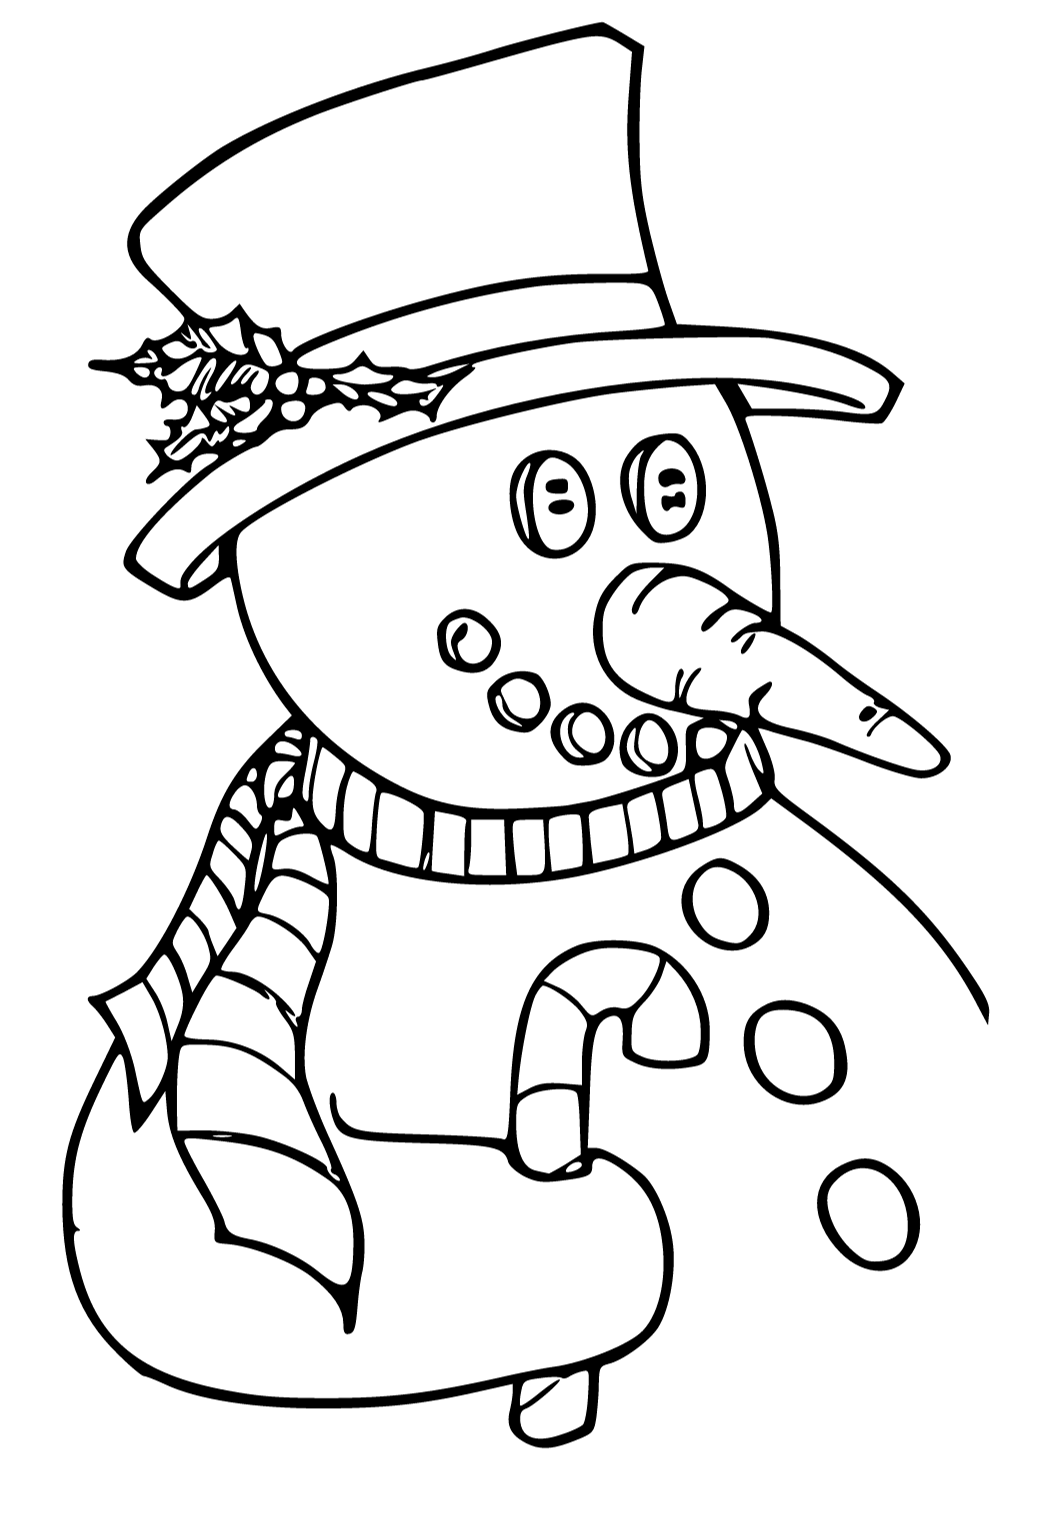 Free printable christmas carrot coloring page for adults and kids